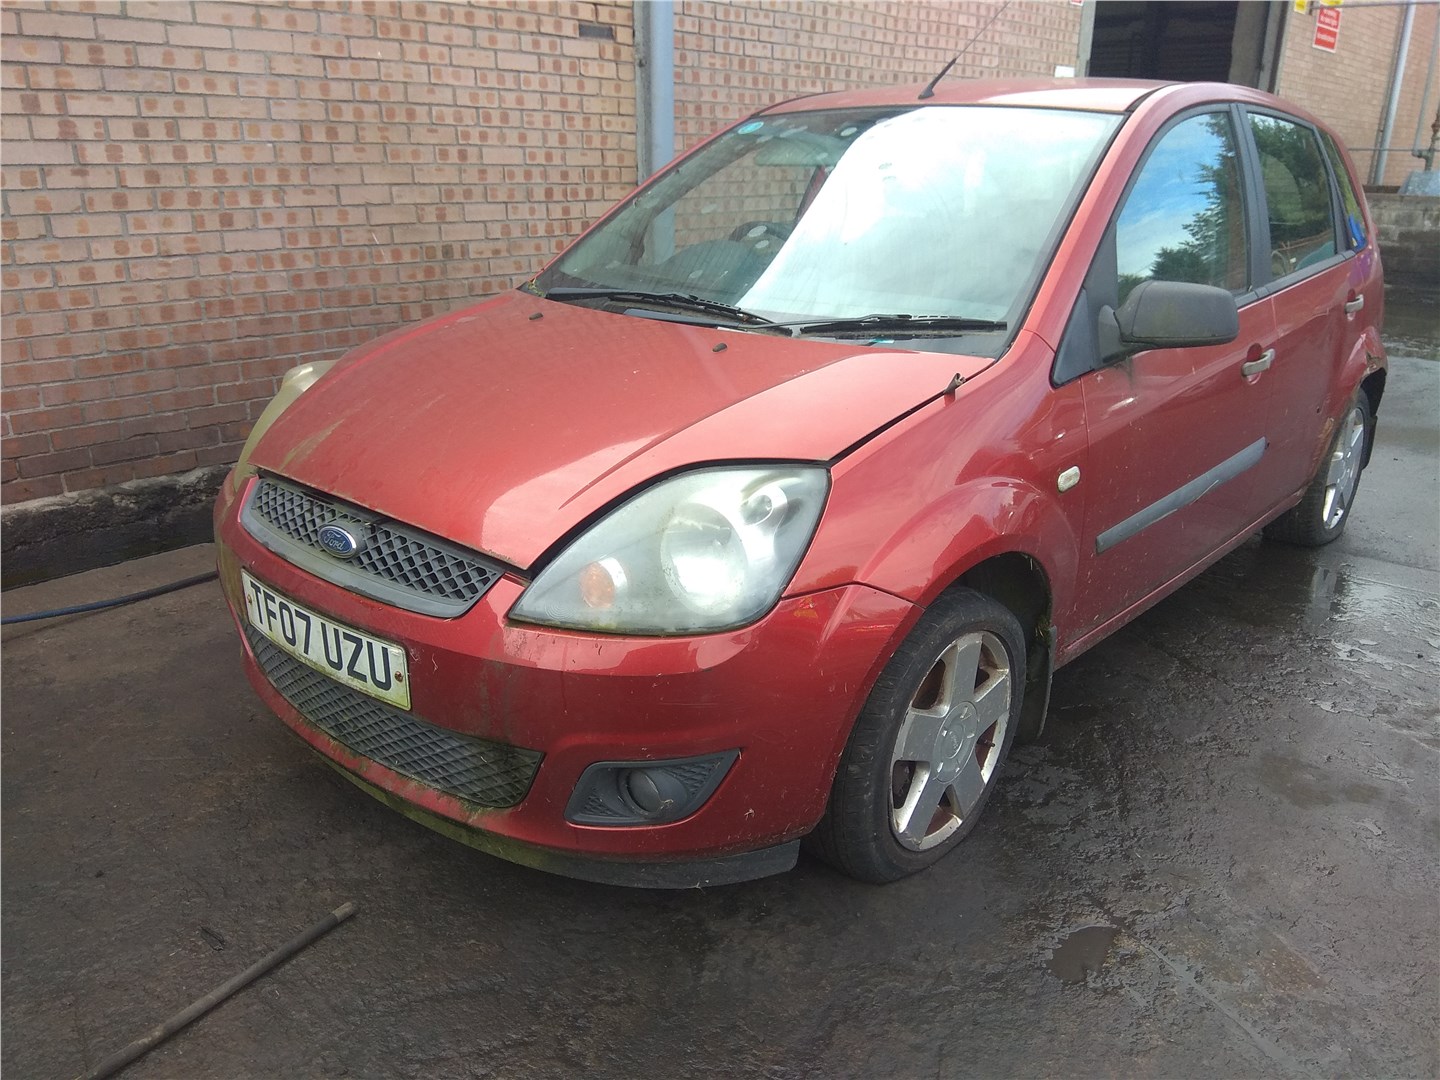 2S61A22601AGW Ручка двери салона Ford Fiesta 2001-2007 2007